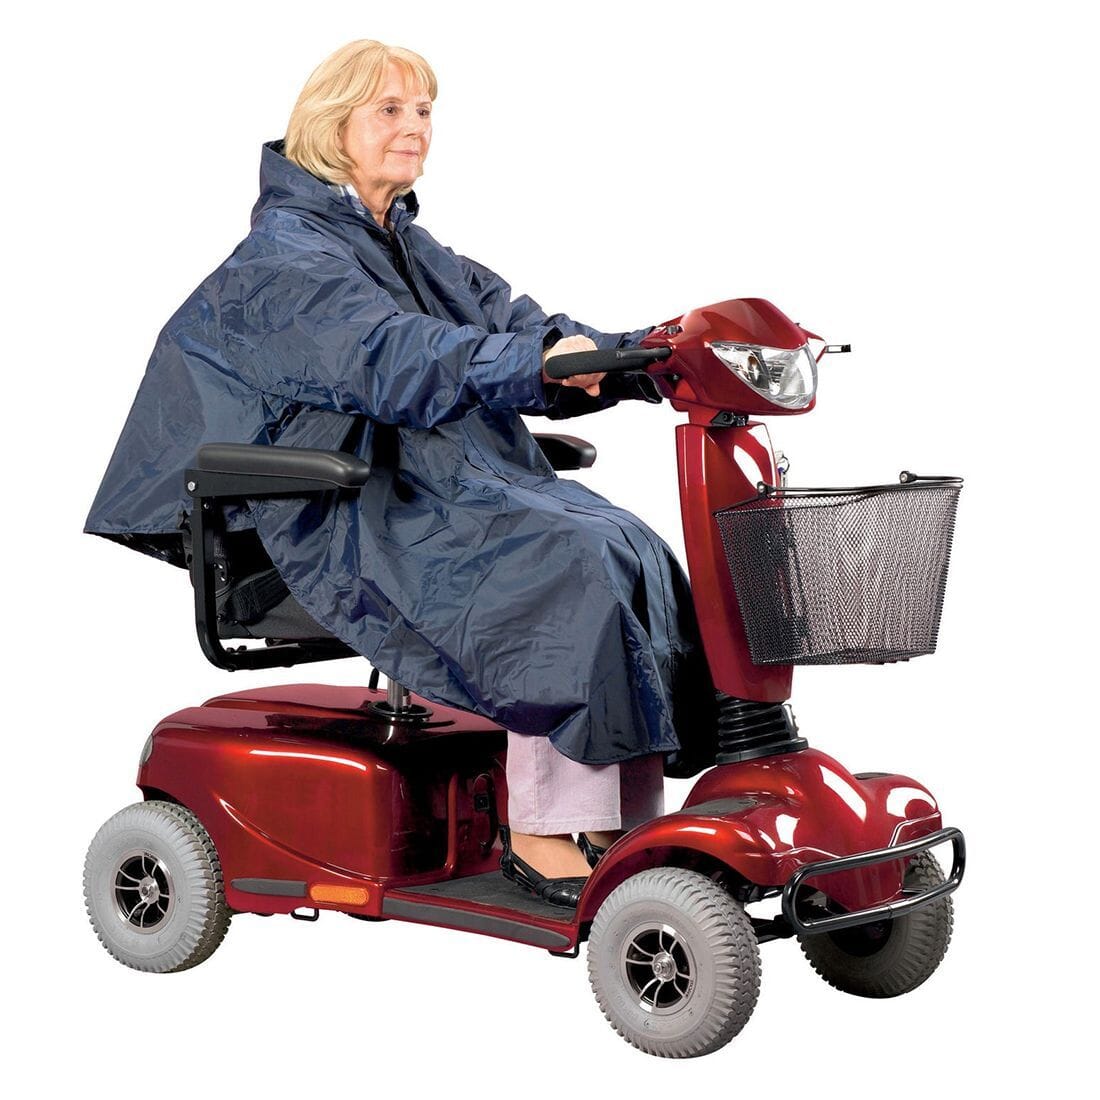 View Deluxe Scooter Poncho information